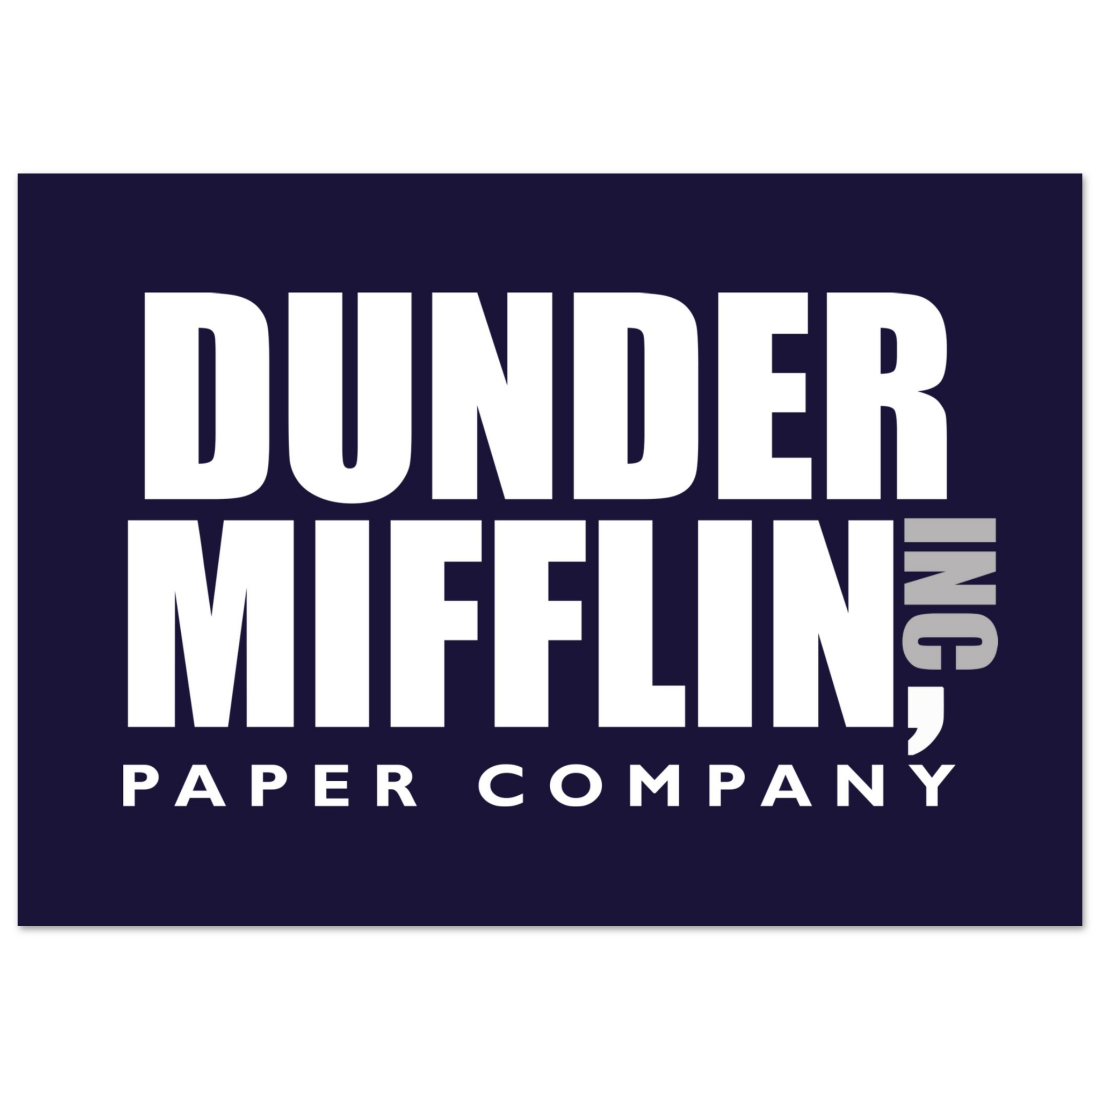 Primary image for Dunder Mifflin Paper Company, Inc from The Office Poster